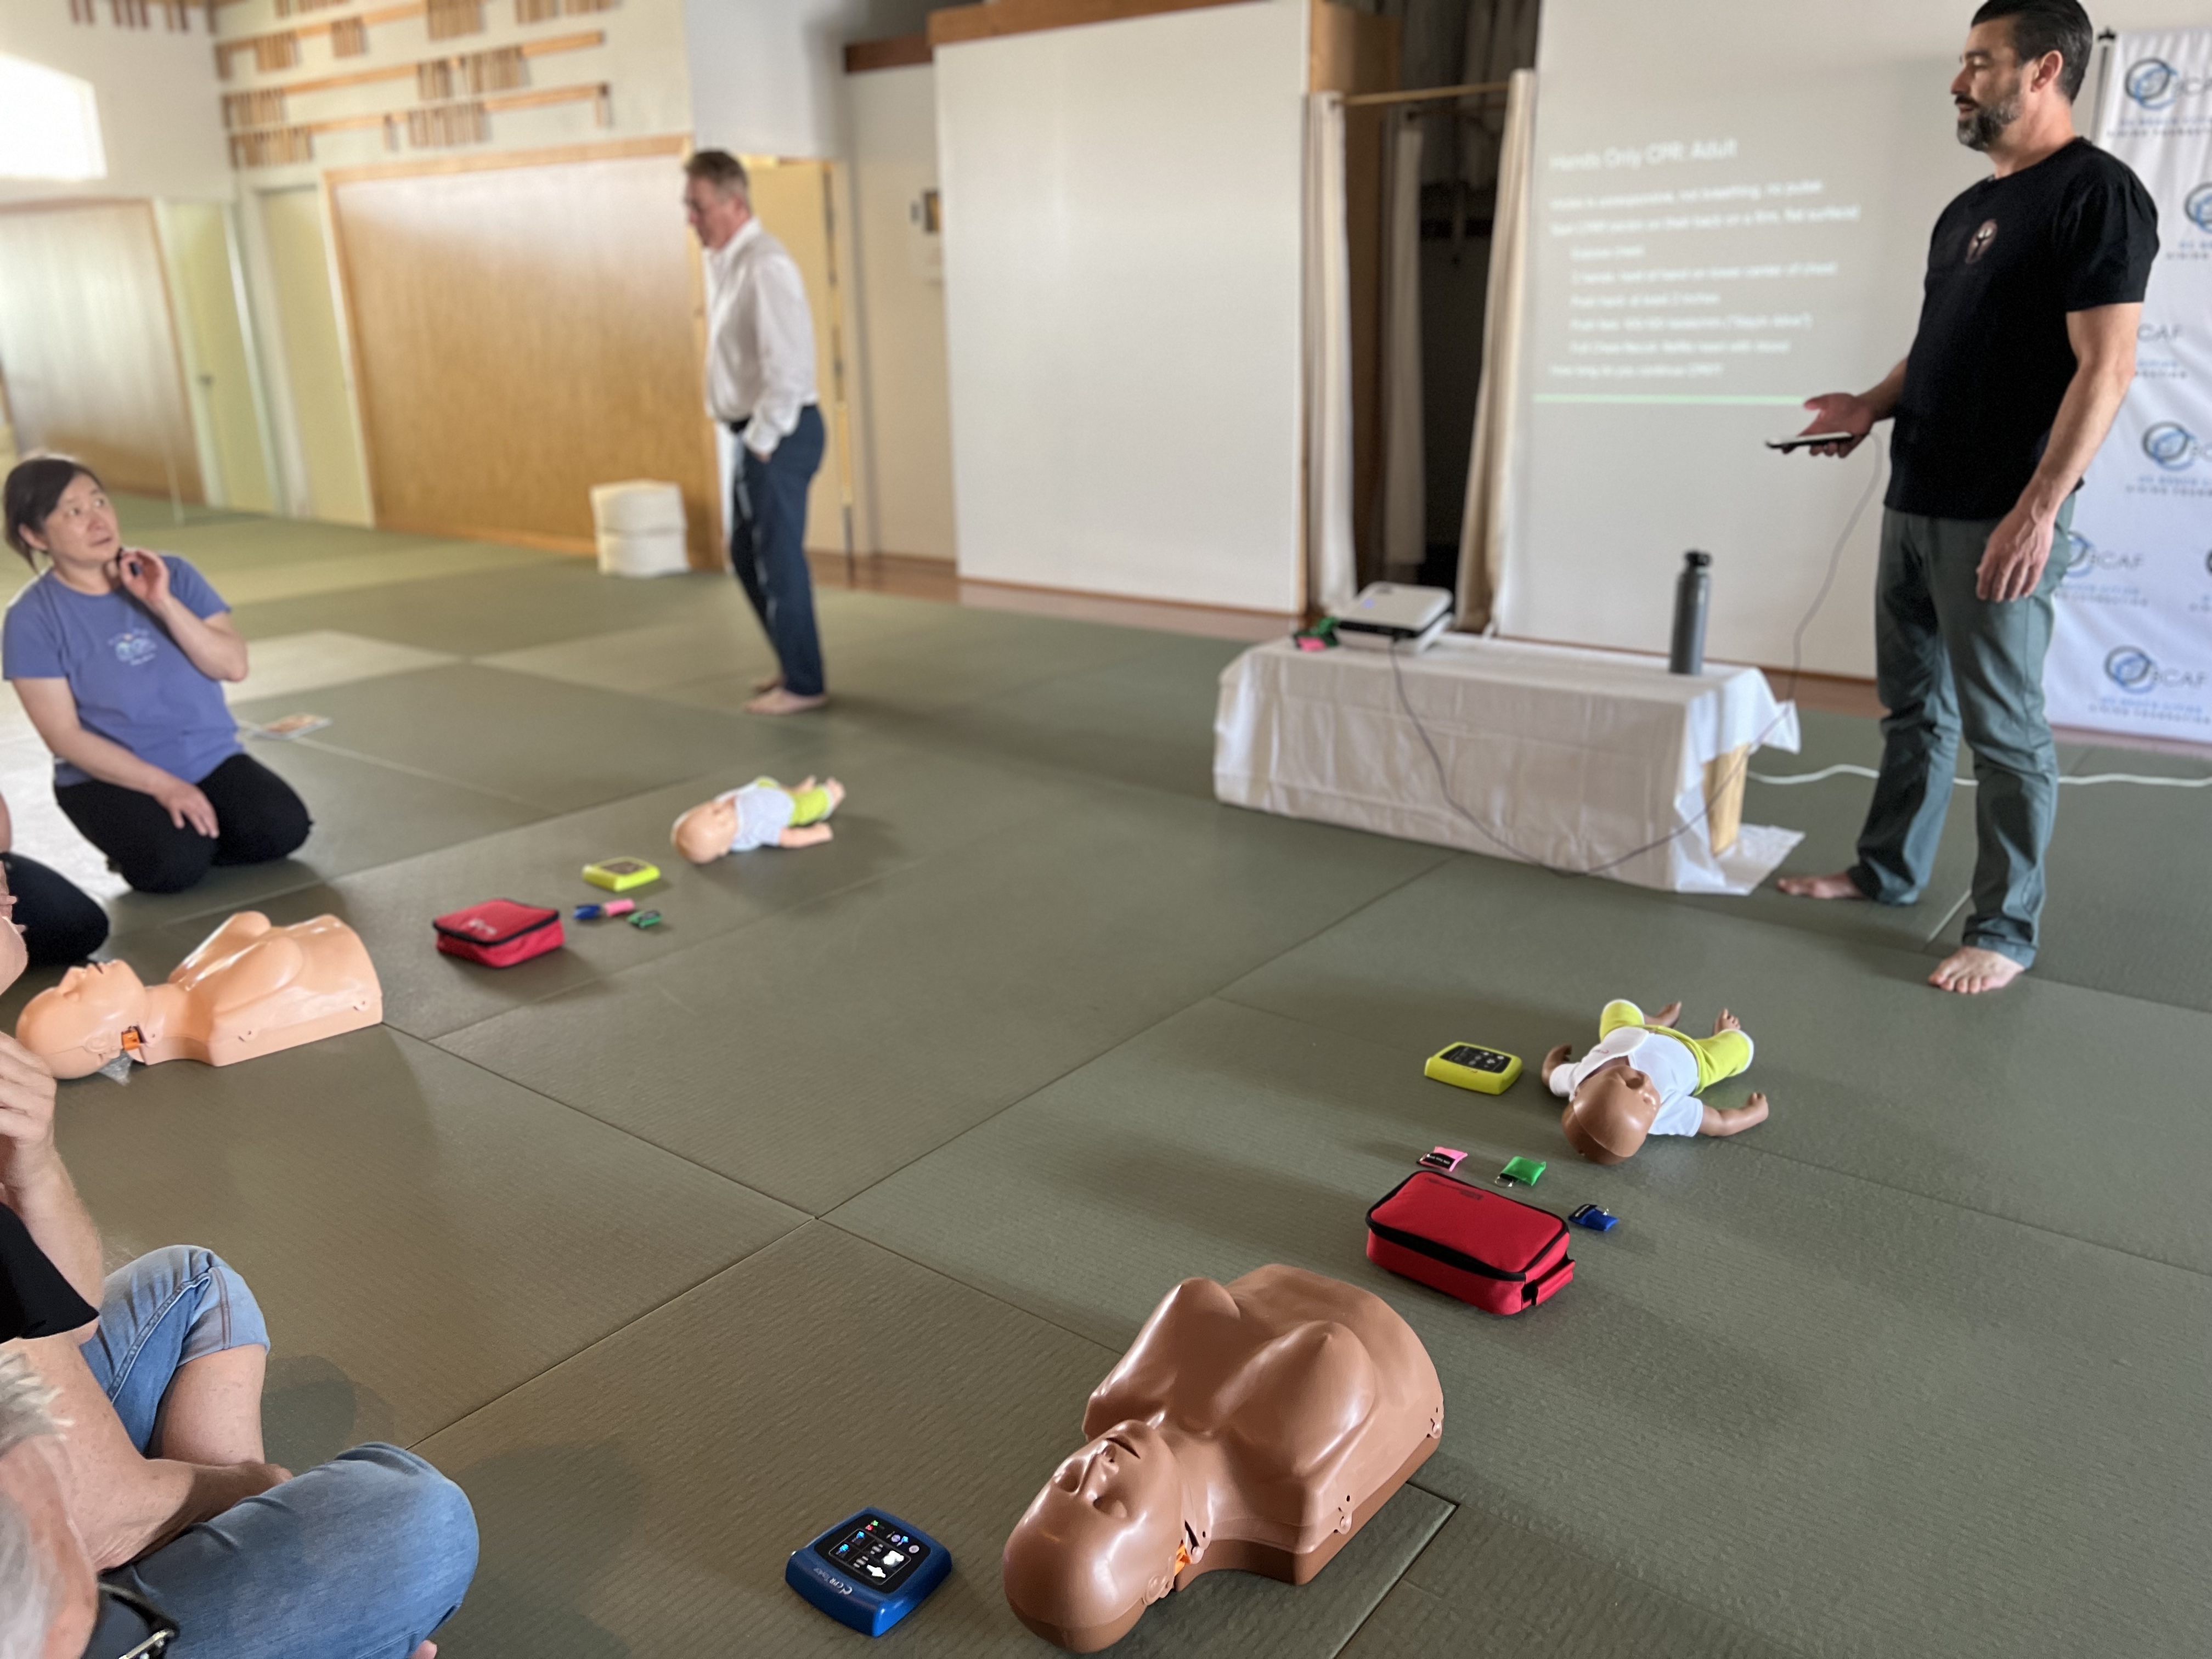 CPR hands on training